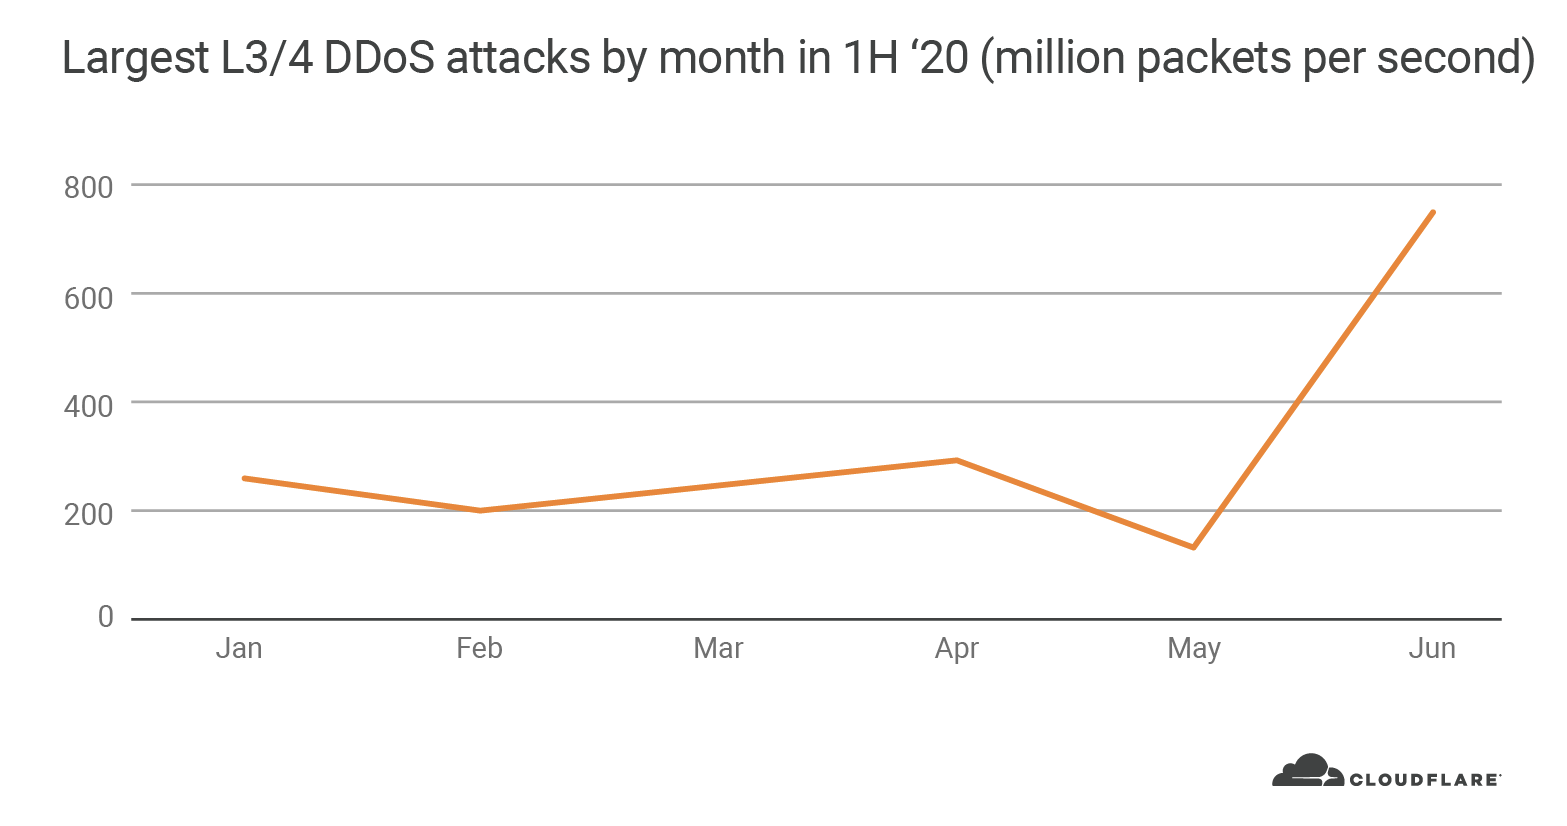 Network-layer DDoS attack trends for Q2 2020